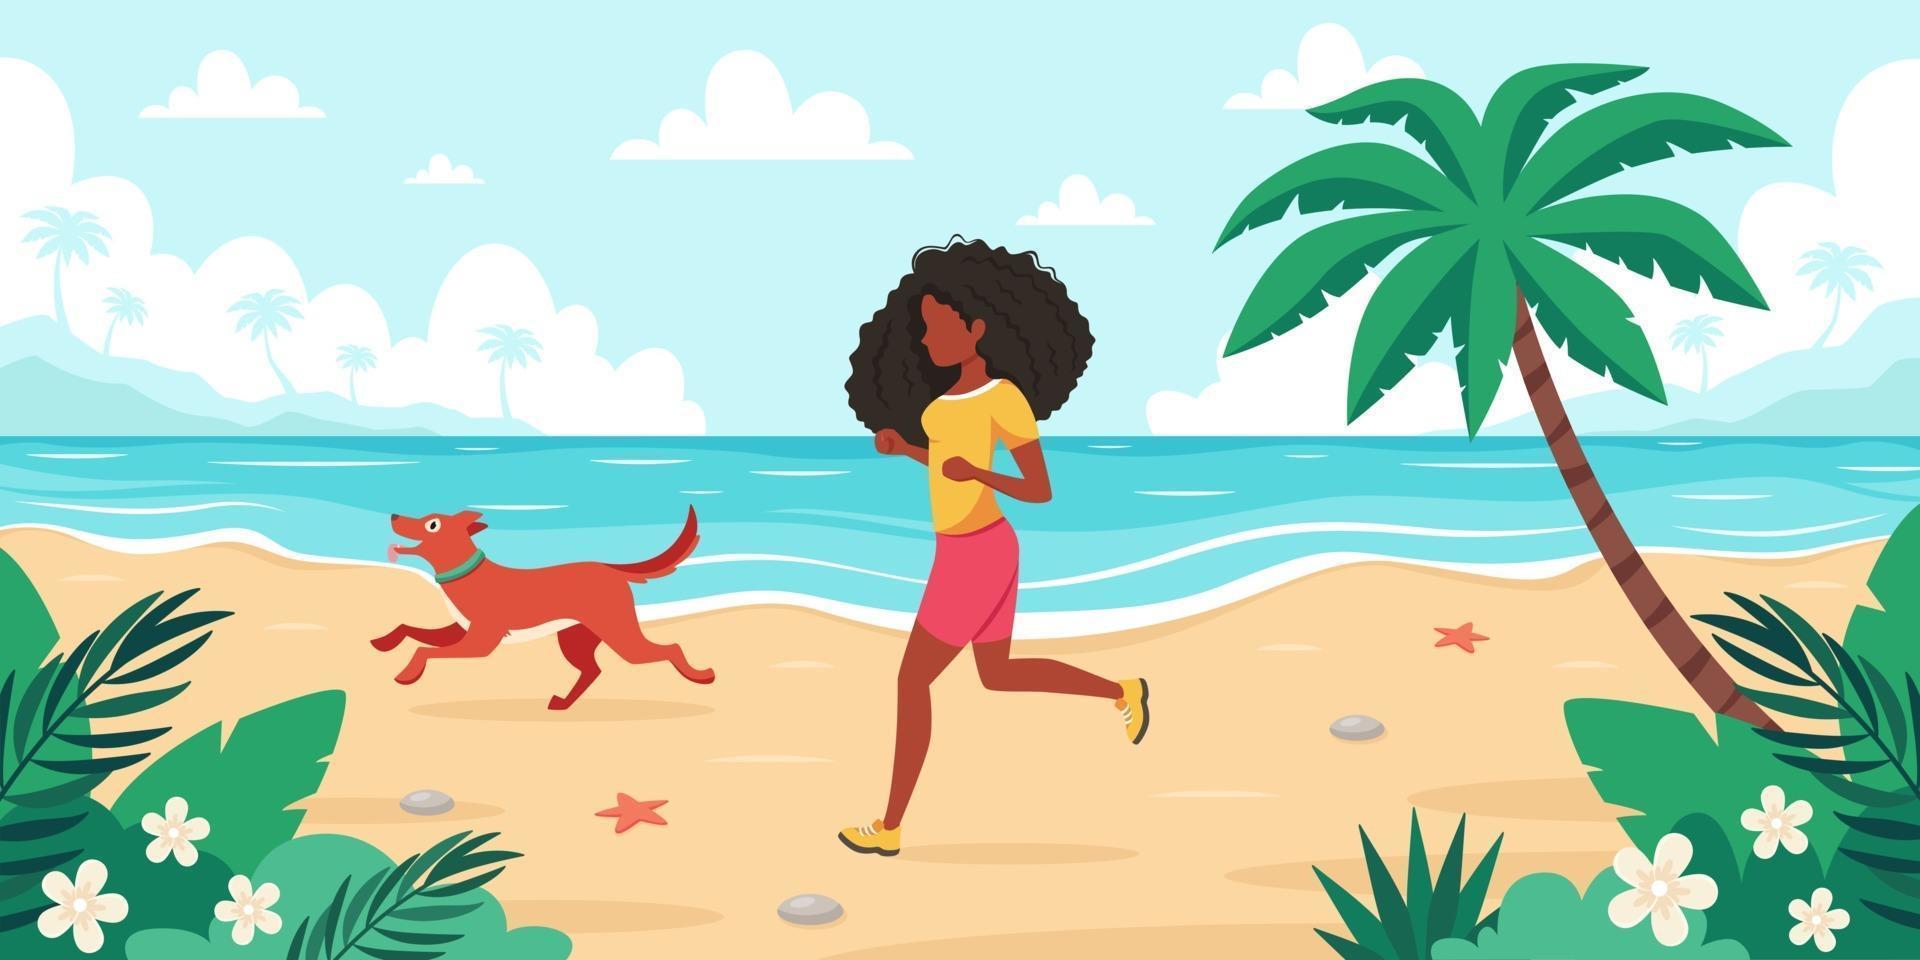 Leisure time on beach. Black woman jogging with dog. Summer time. Vector illustration